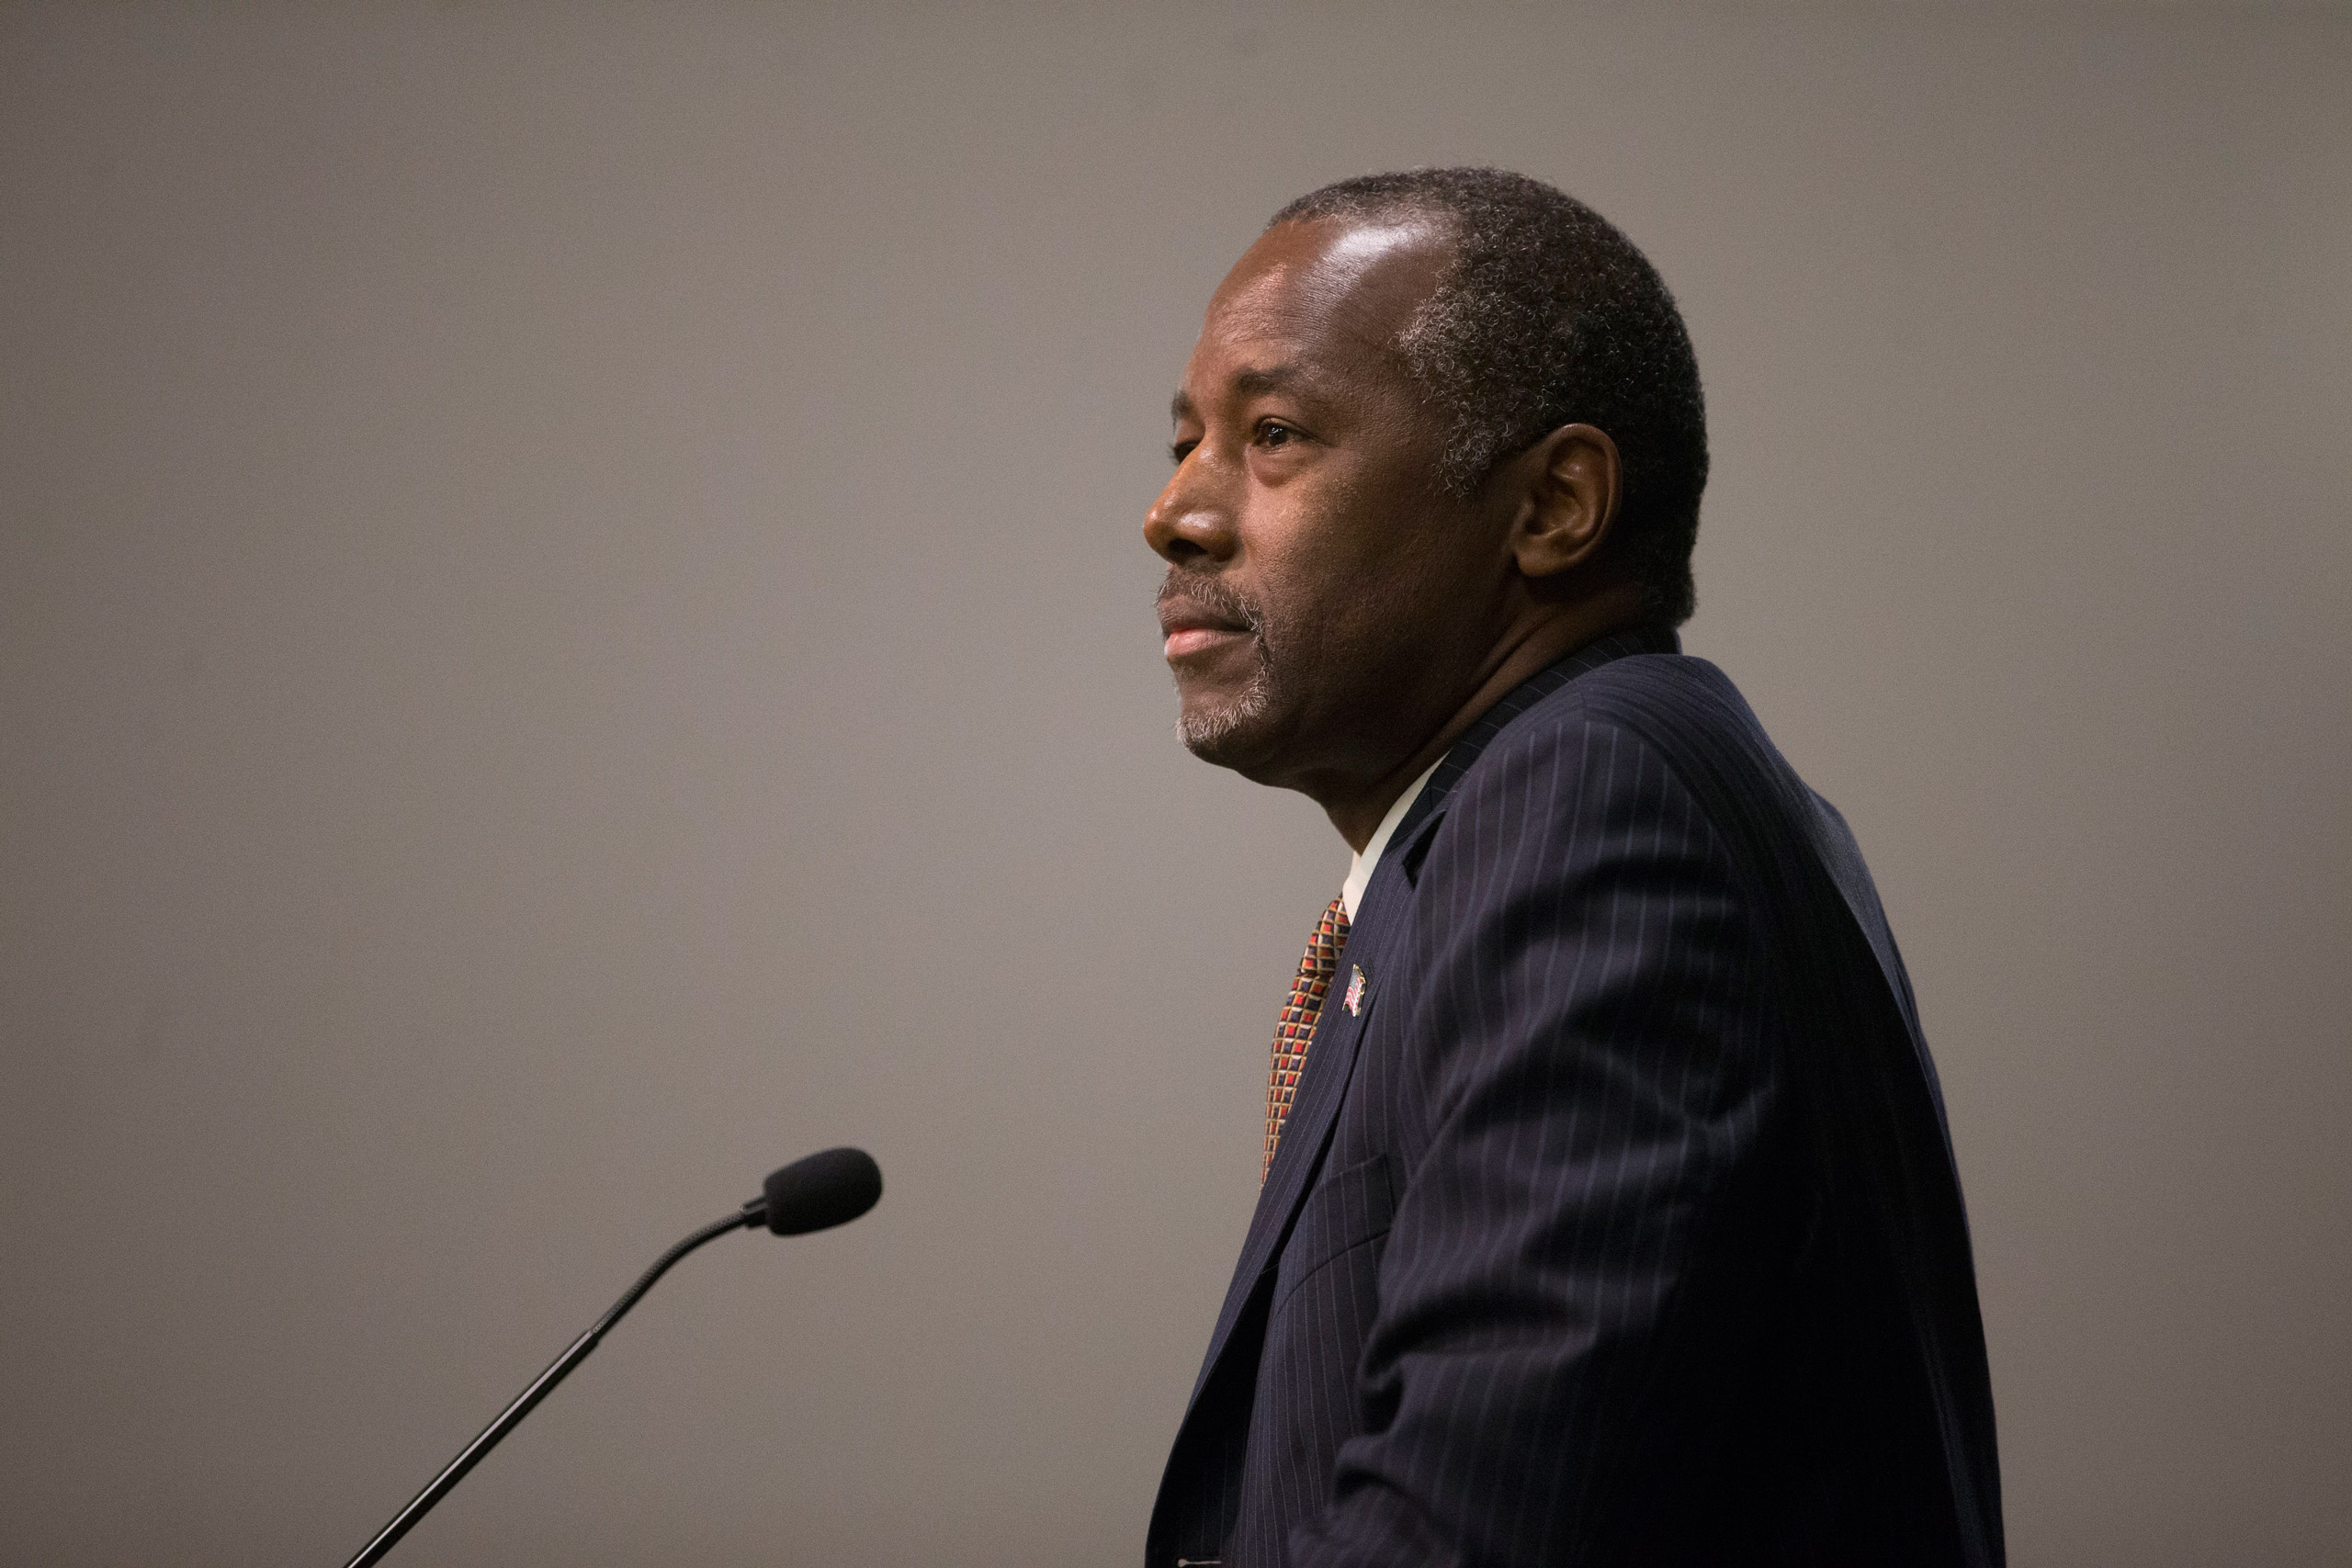 Republican presidential candidate Ben Carson takes questions at a news conference at the Sharonville Convention Center in Cincinnati on Sept. 22, 2015. (John Minchillo—AP)